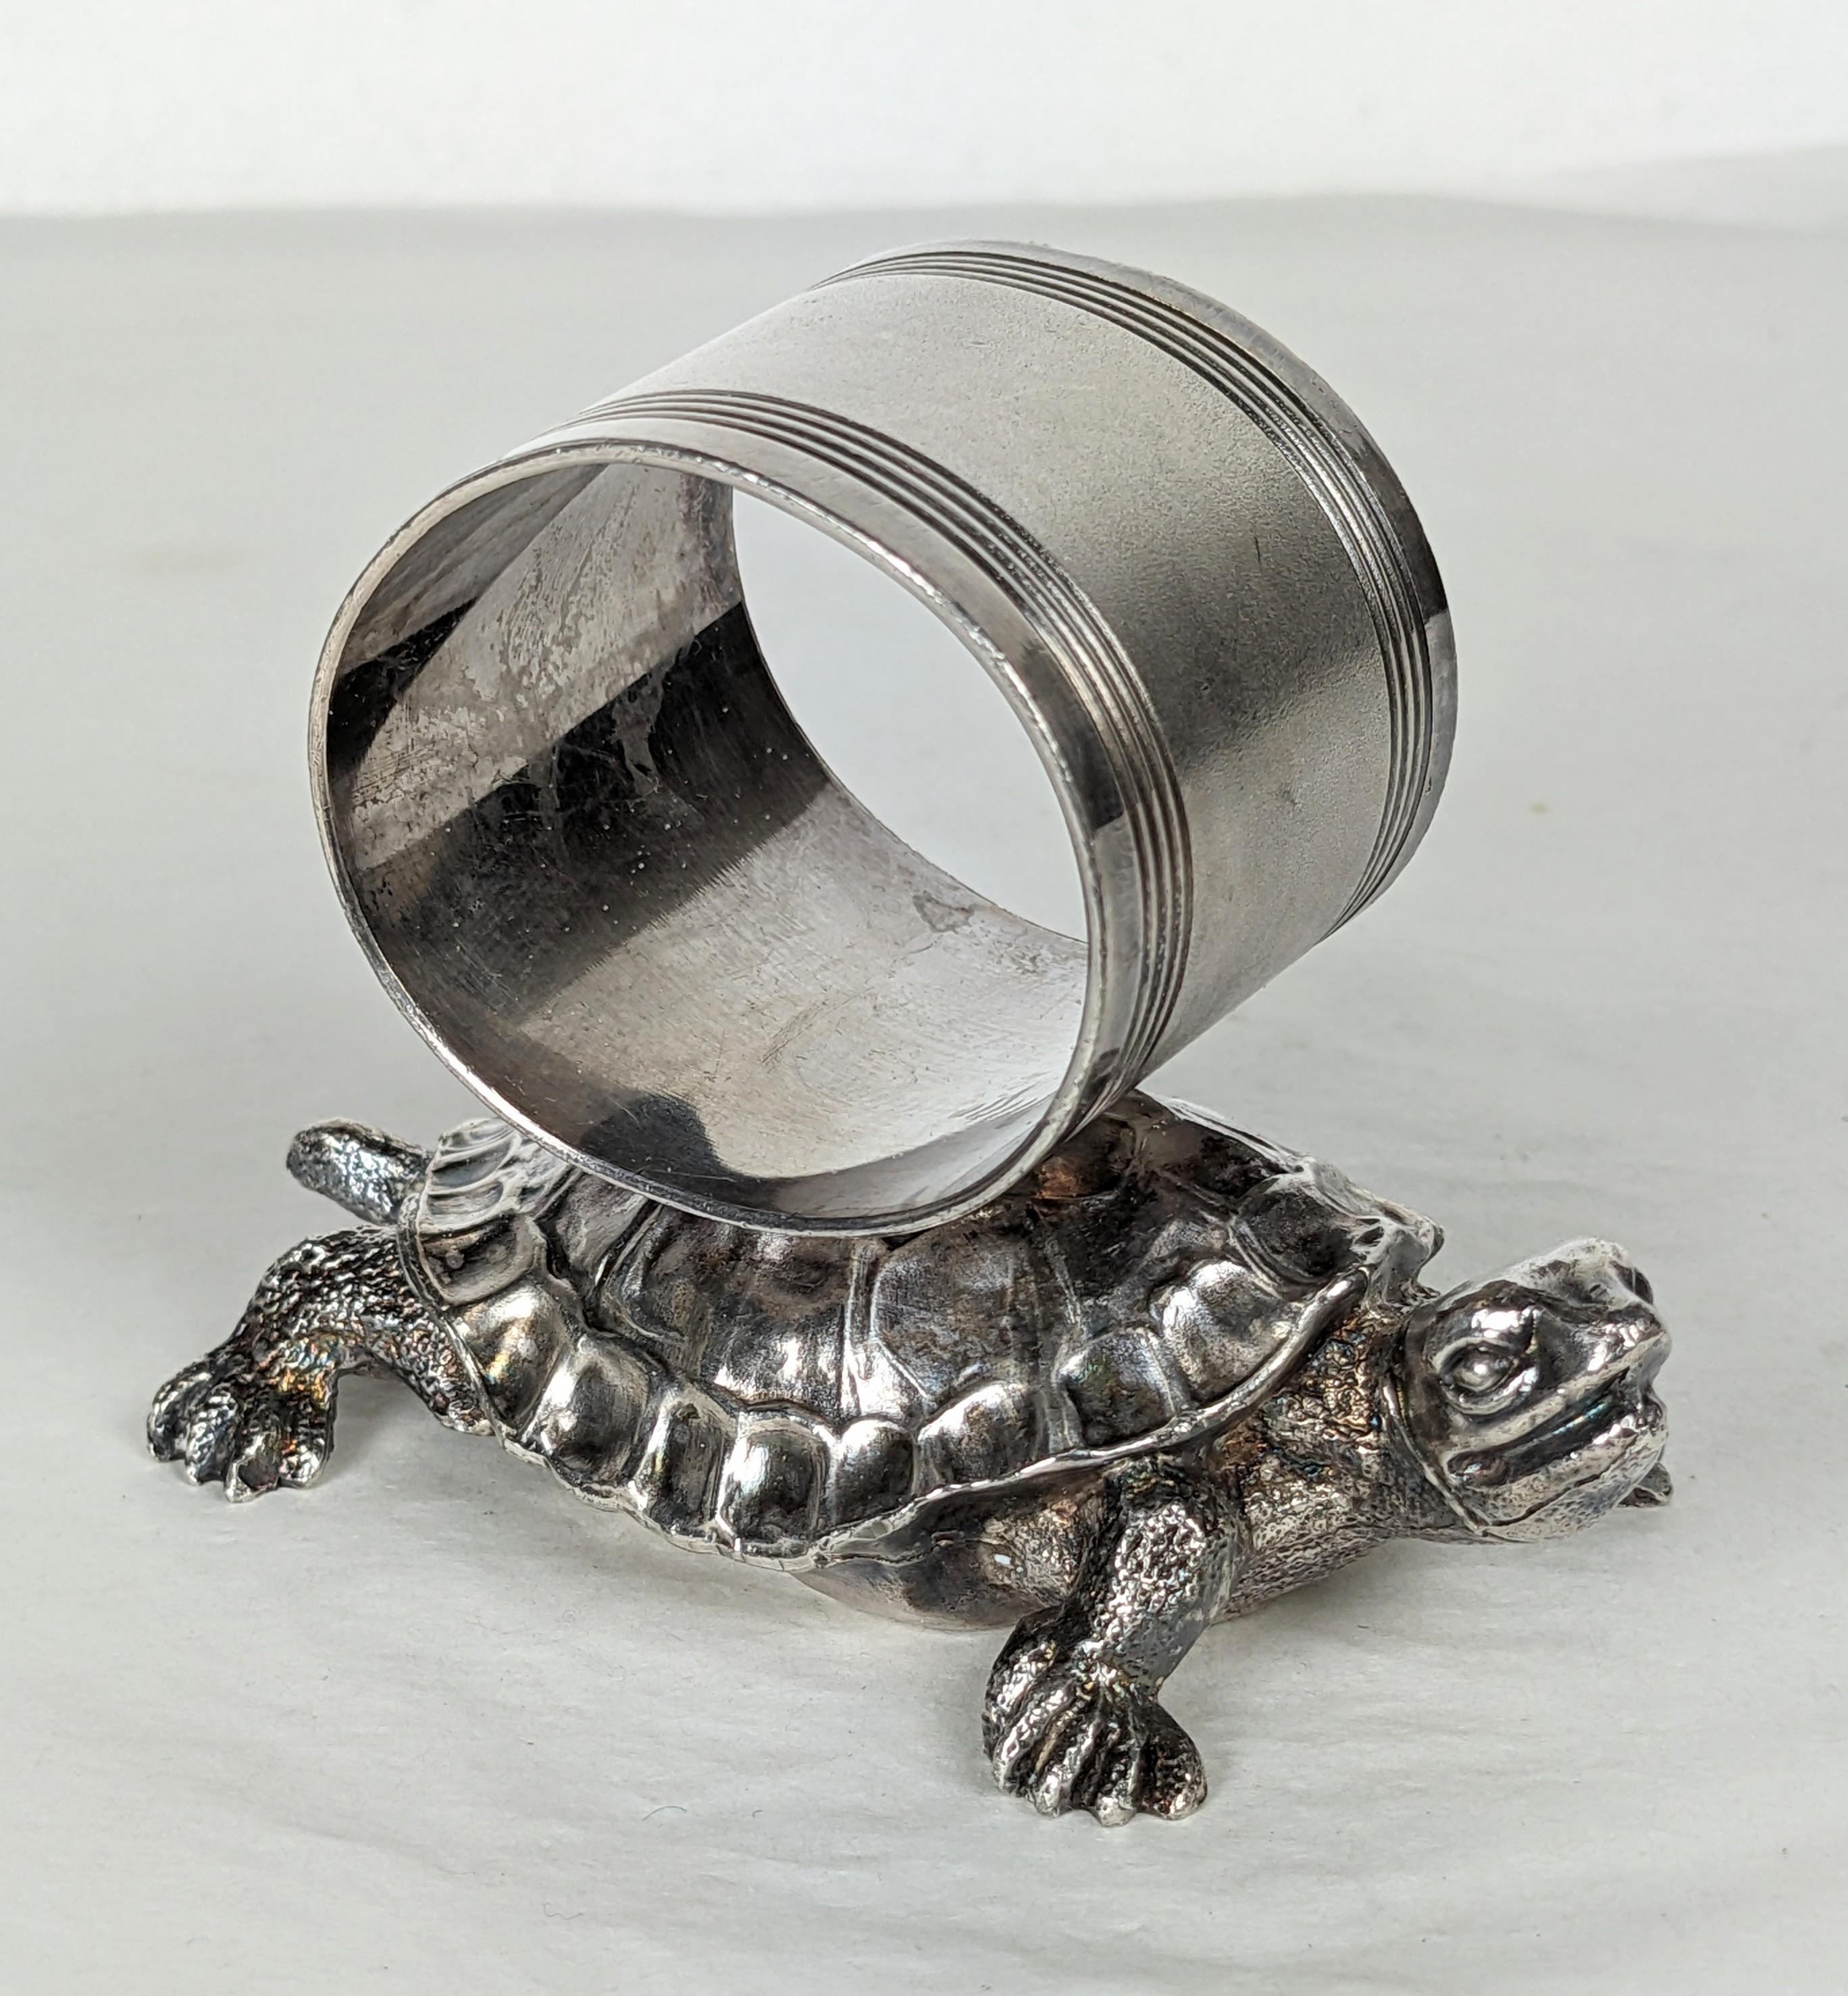 Rare Victorian Pairpoint Figural Silverplate Napkin Ring. Beautifully modeled turtle holding the napkin ring made by the Pairpoint Co. New Bedford, Massachusetts, circa 1890.